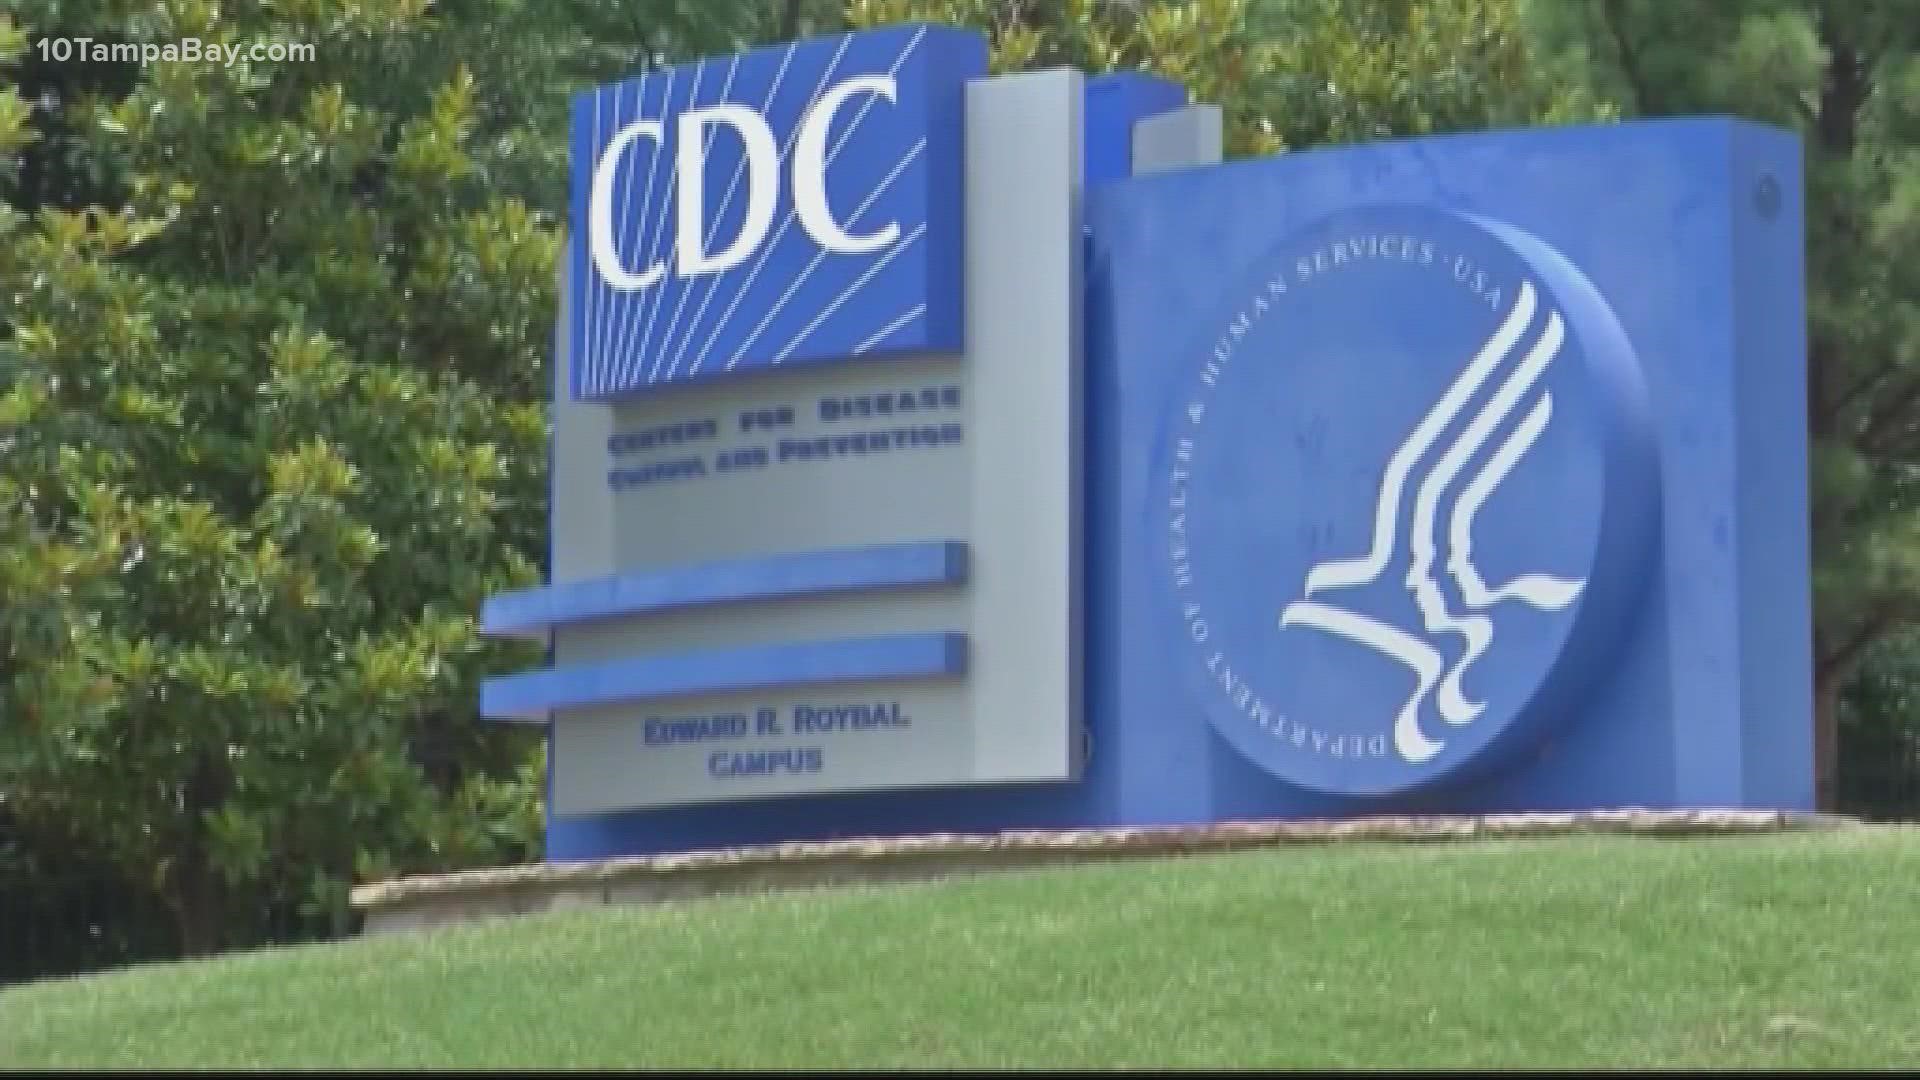 On Monday, the CDC announced new guidelines for people who have been exposed to COVID-19.